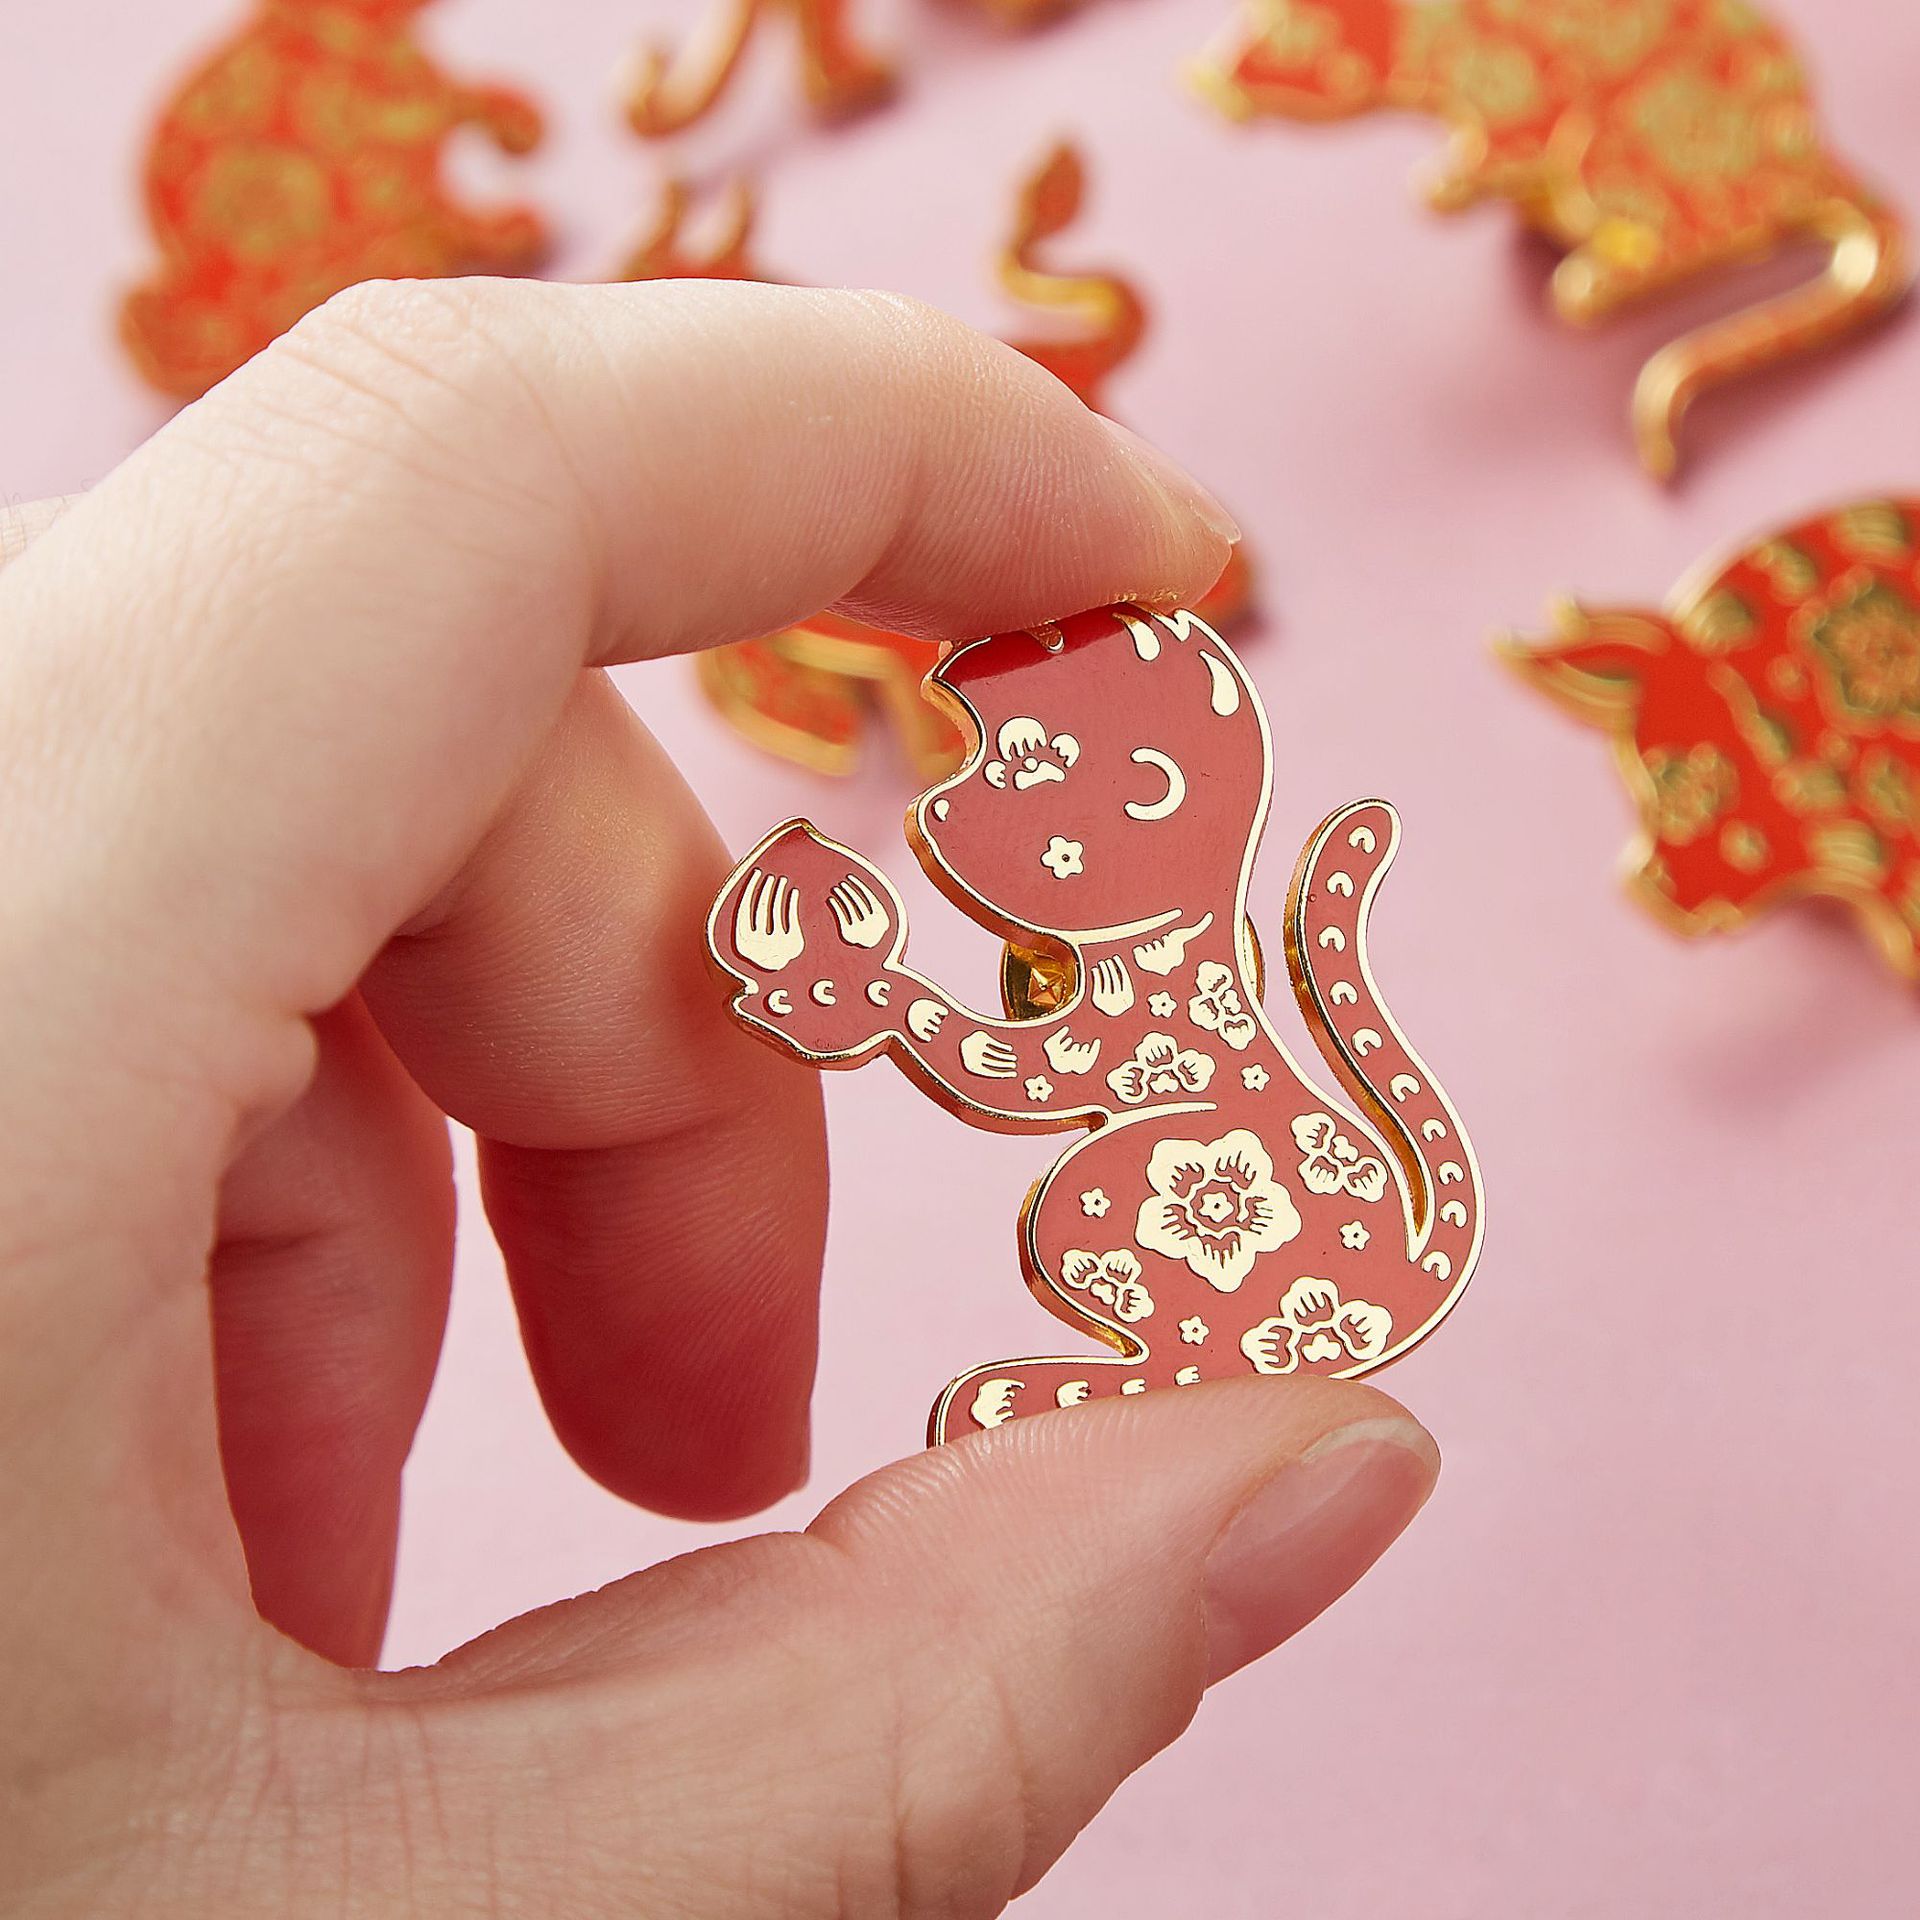 creative chinese red zodiac badge in stock wholesale dragon horse cattle sheep dog monkey rooster rat snake rabbit sheep & pig tiger brooch